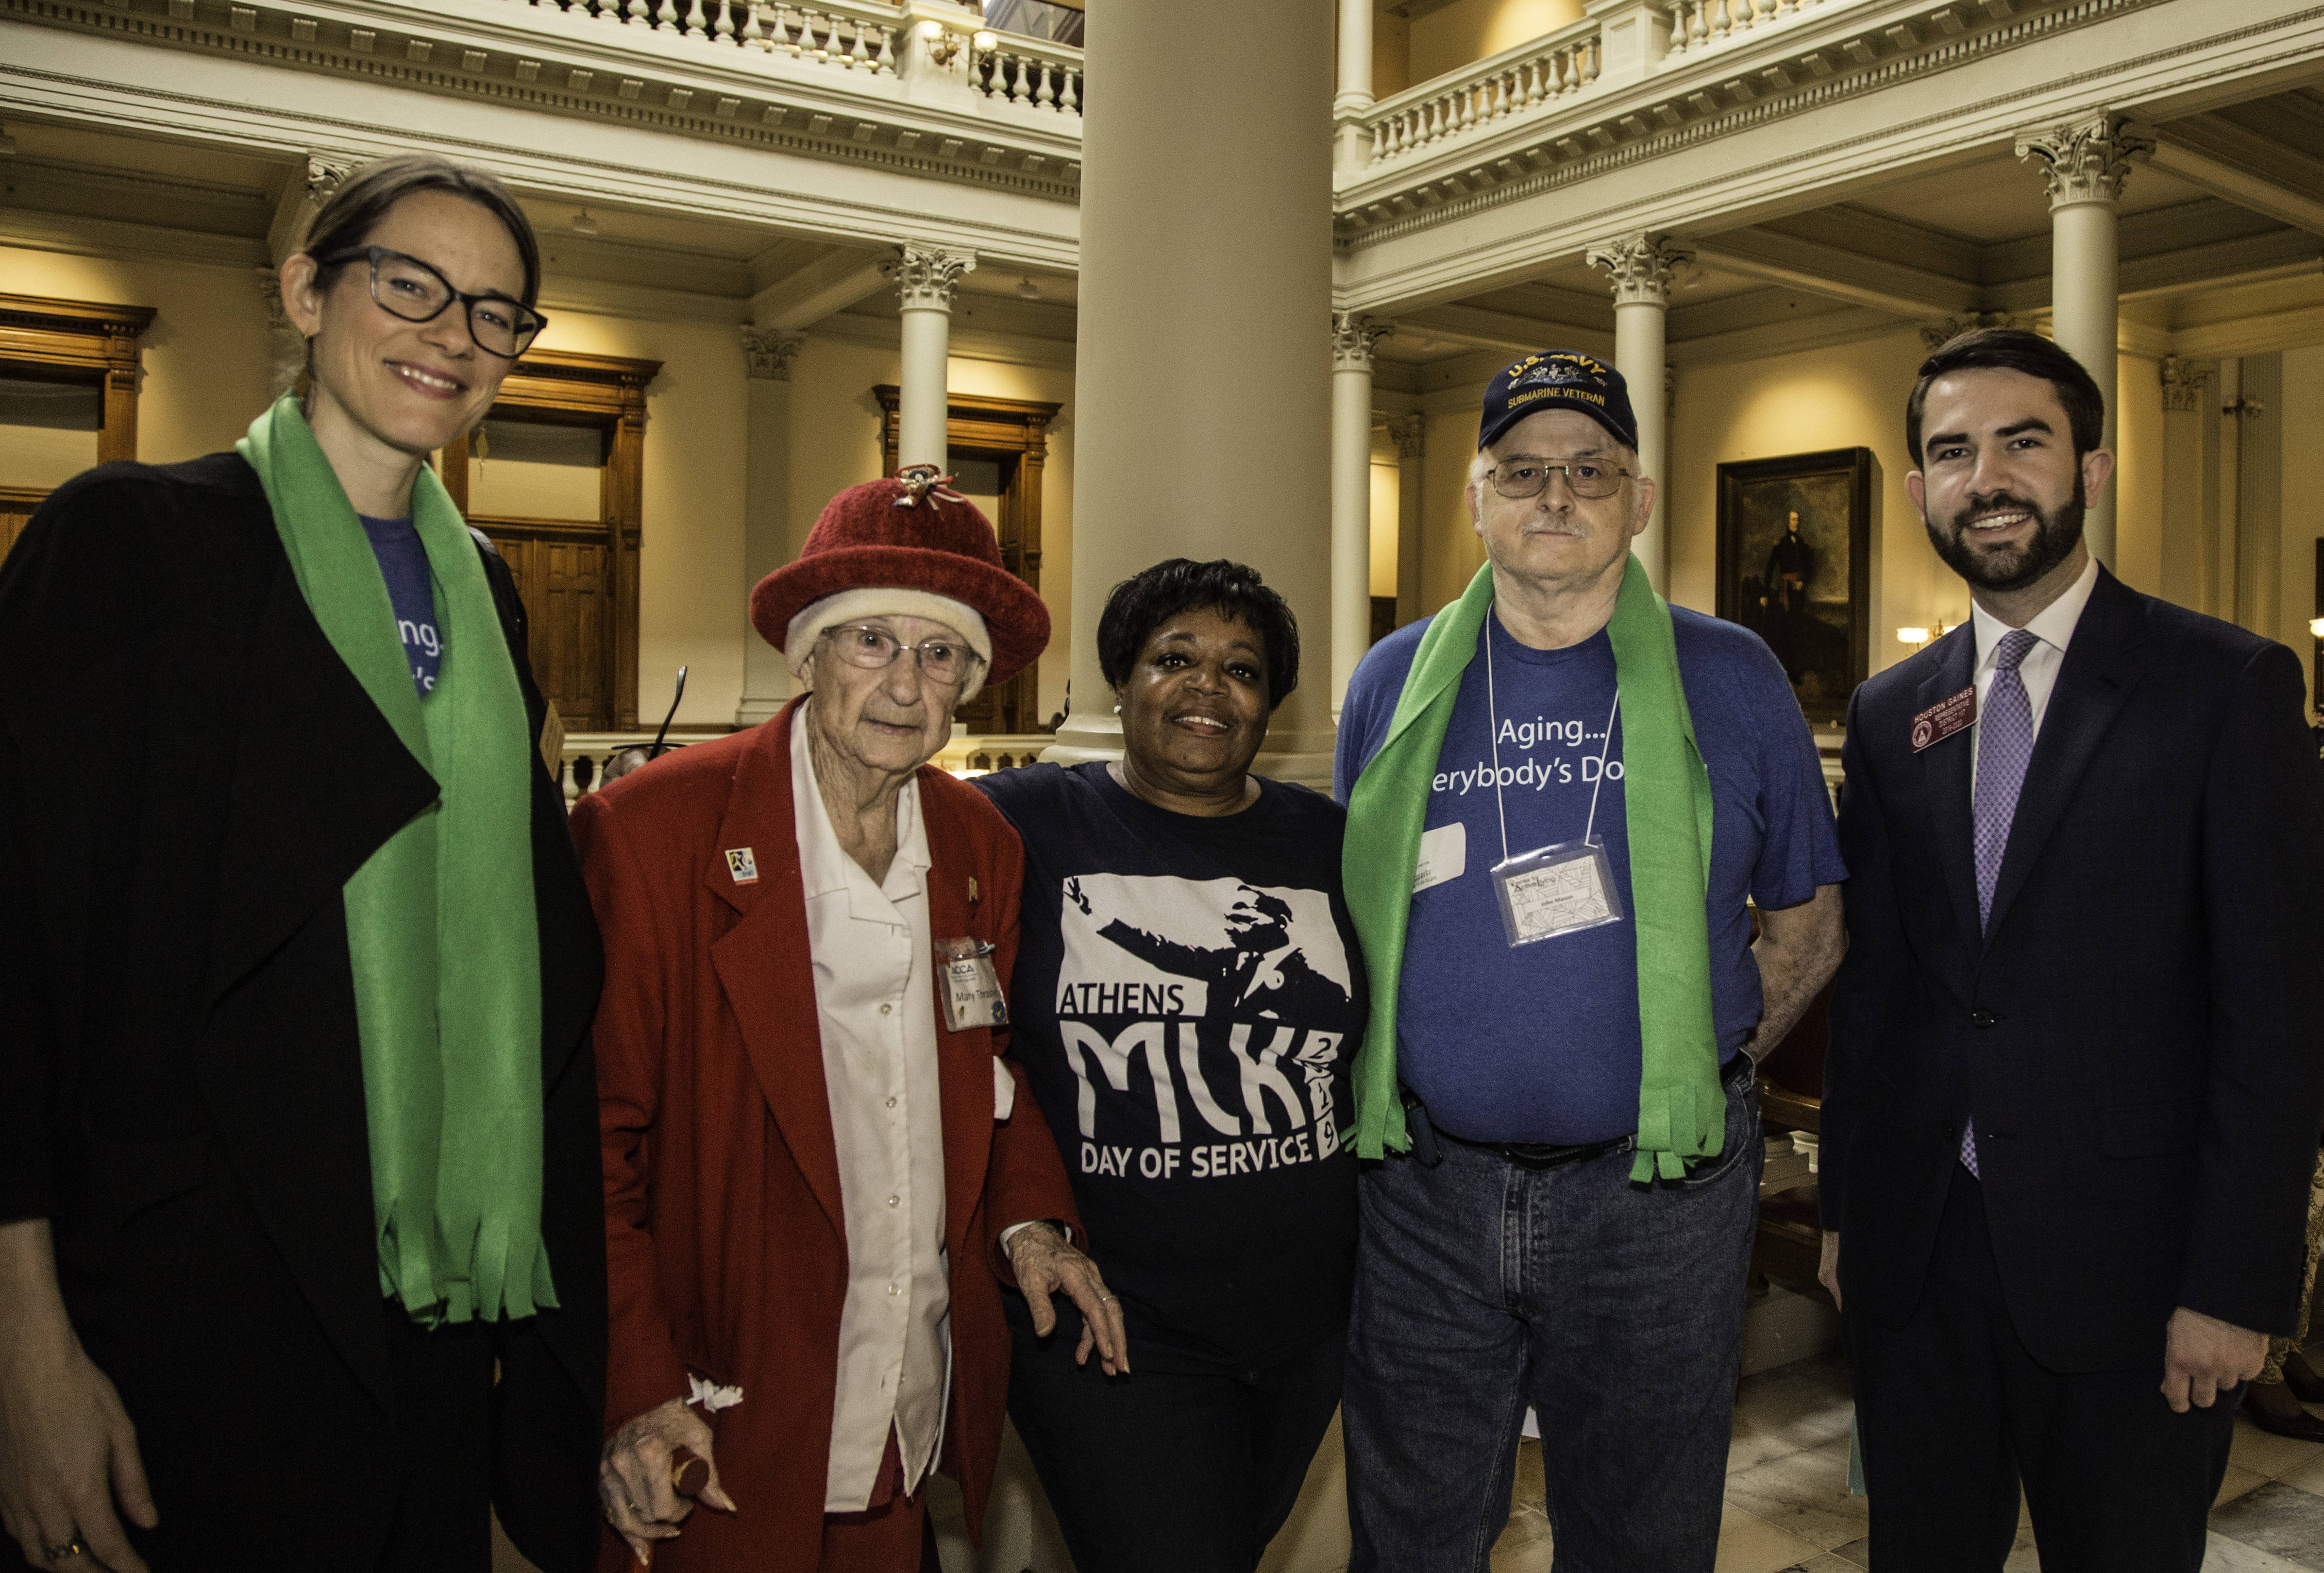 Senior Day at the Georgia State Capitol